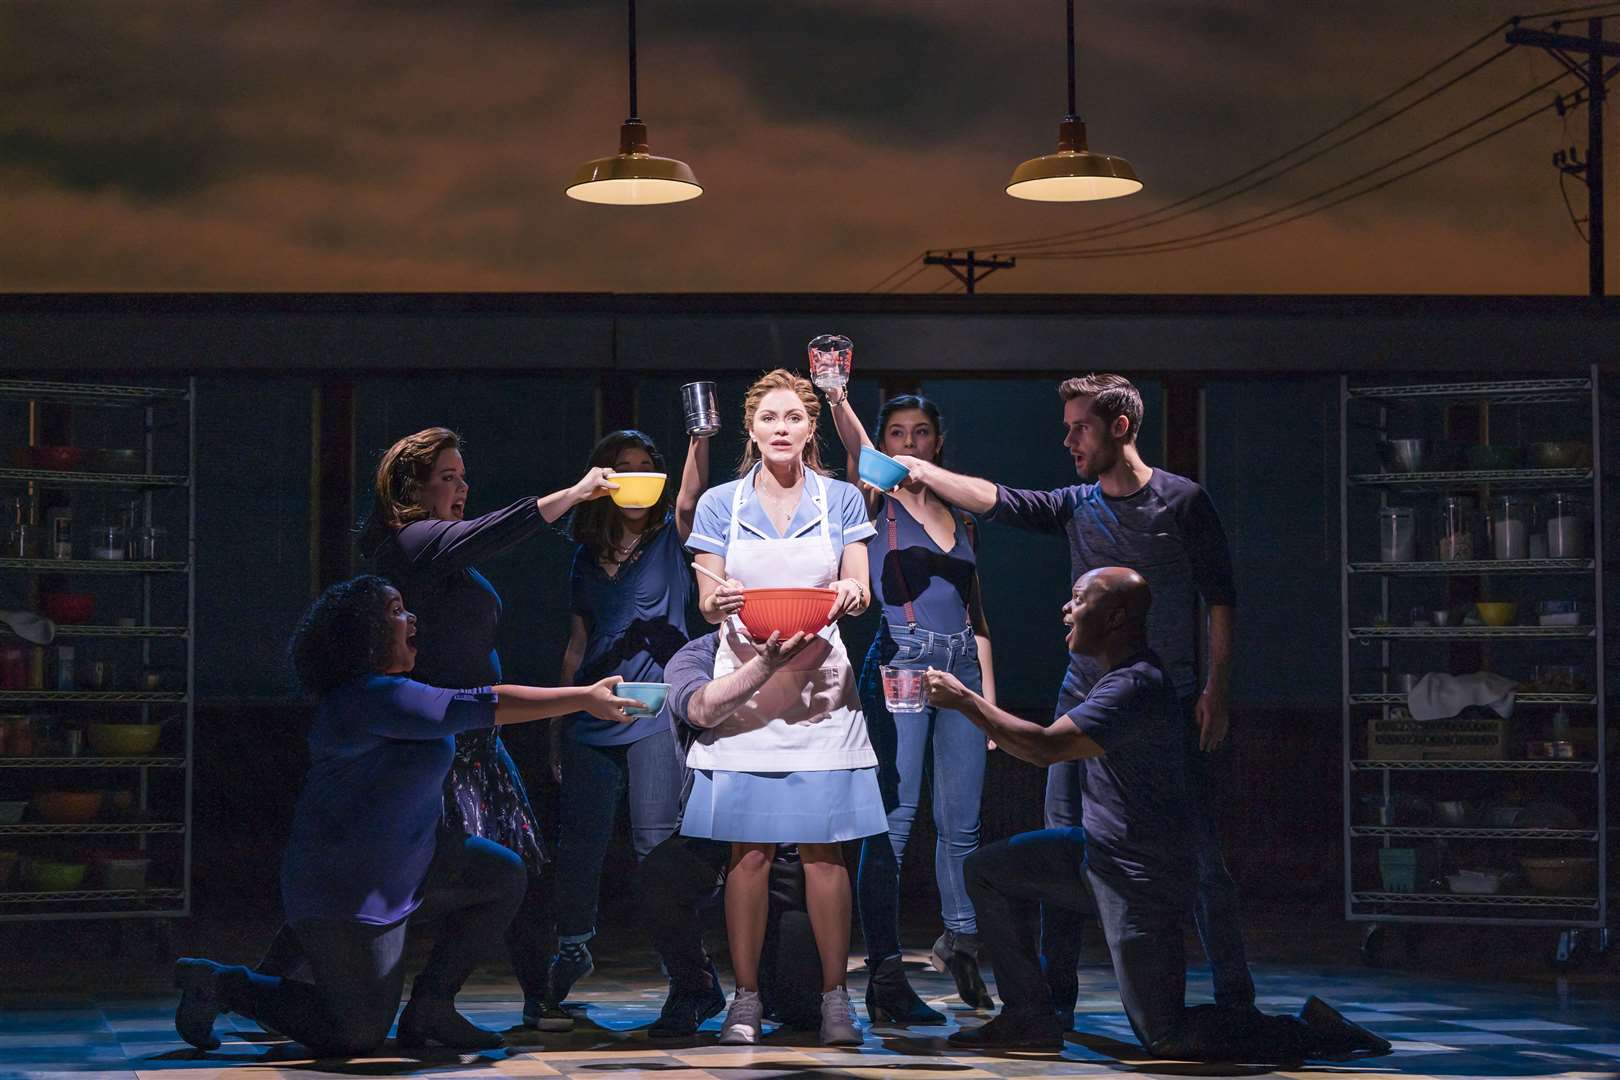 Waitress production images. All photo credit : Johan Persson (8083712)